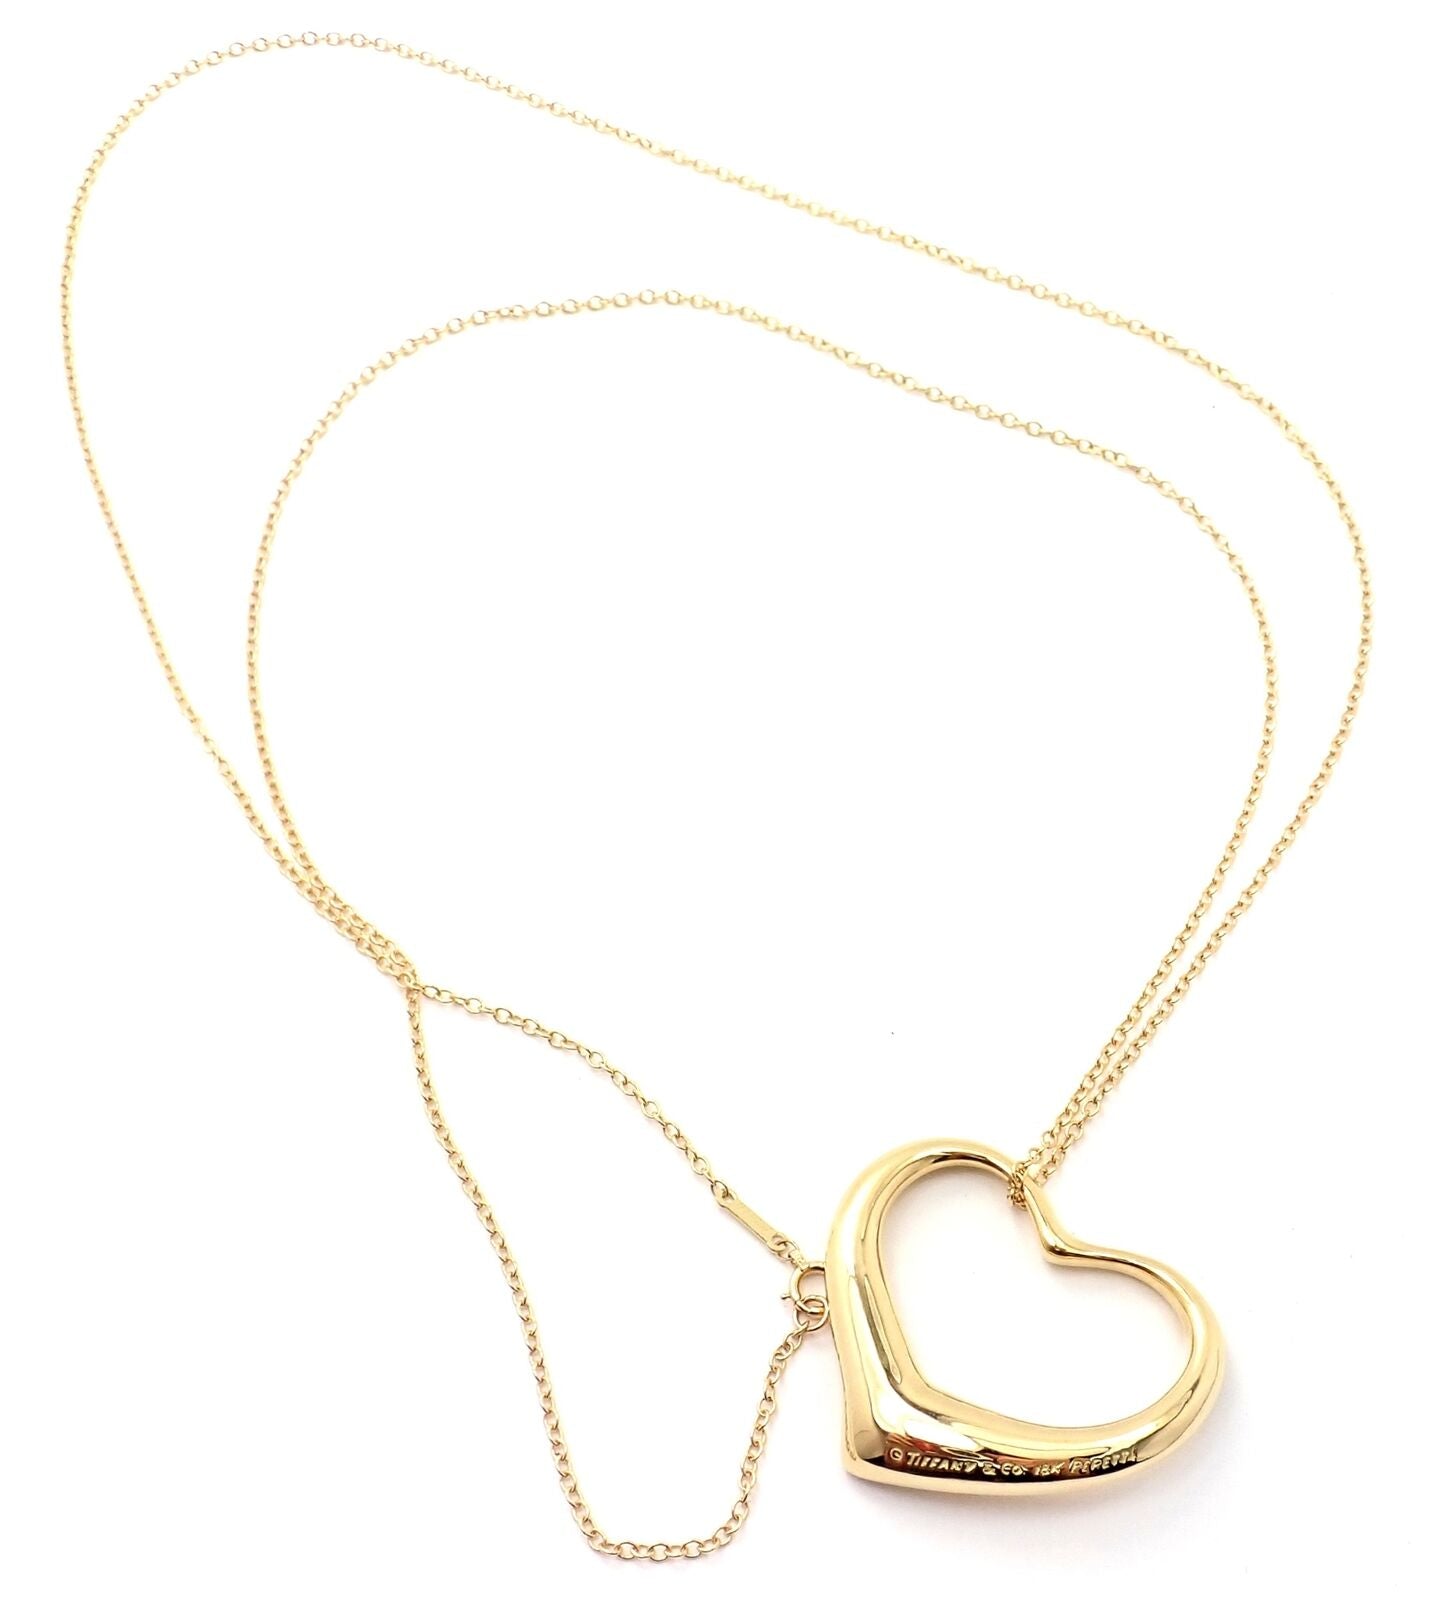 Tiffany & Co. Jewelry & Watches:Fine Jewelry:Necklaces & Pendants Tiffany & Co 18k Yellow Gold Peretti Extra Large Open Heart Pendant 30" Necklace